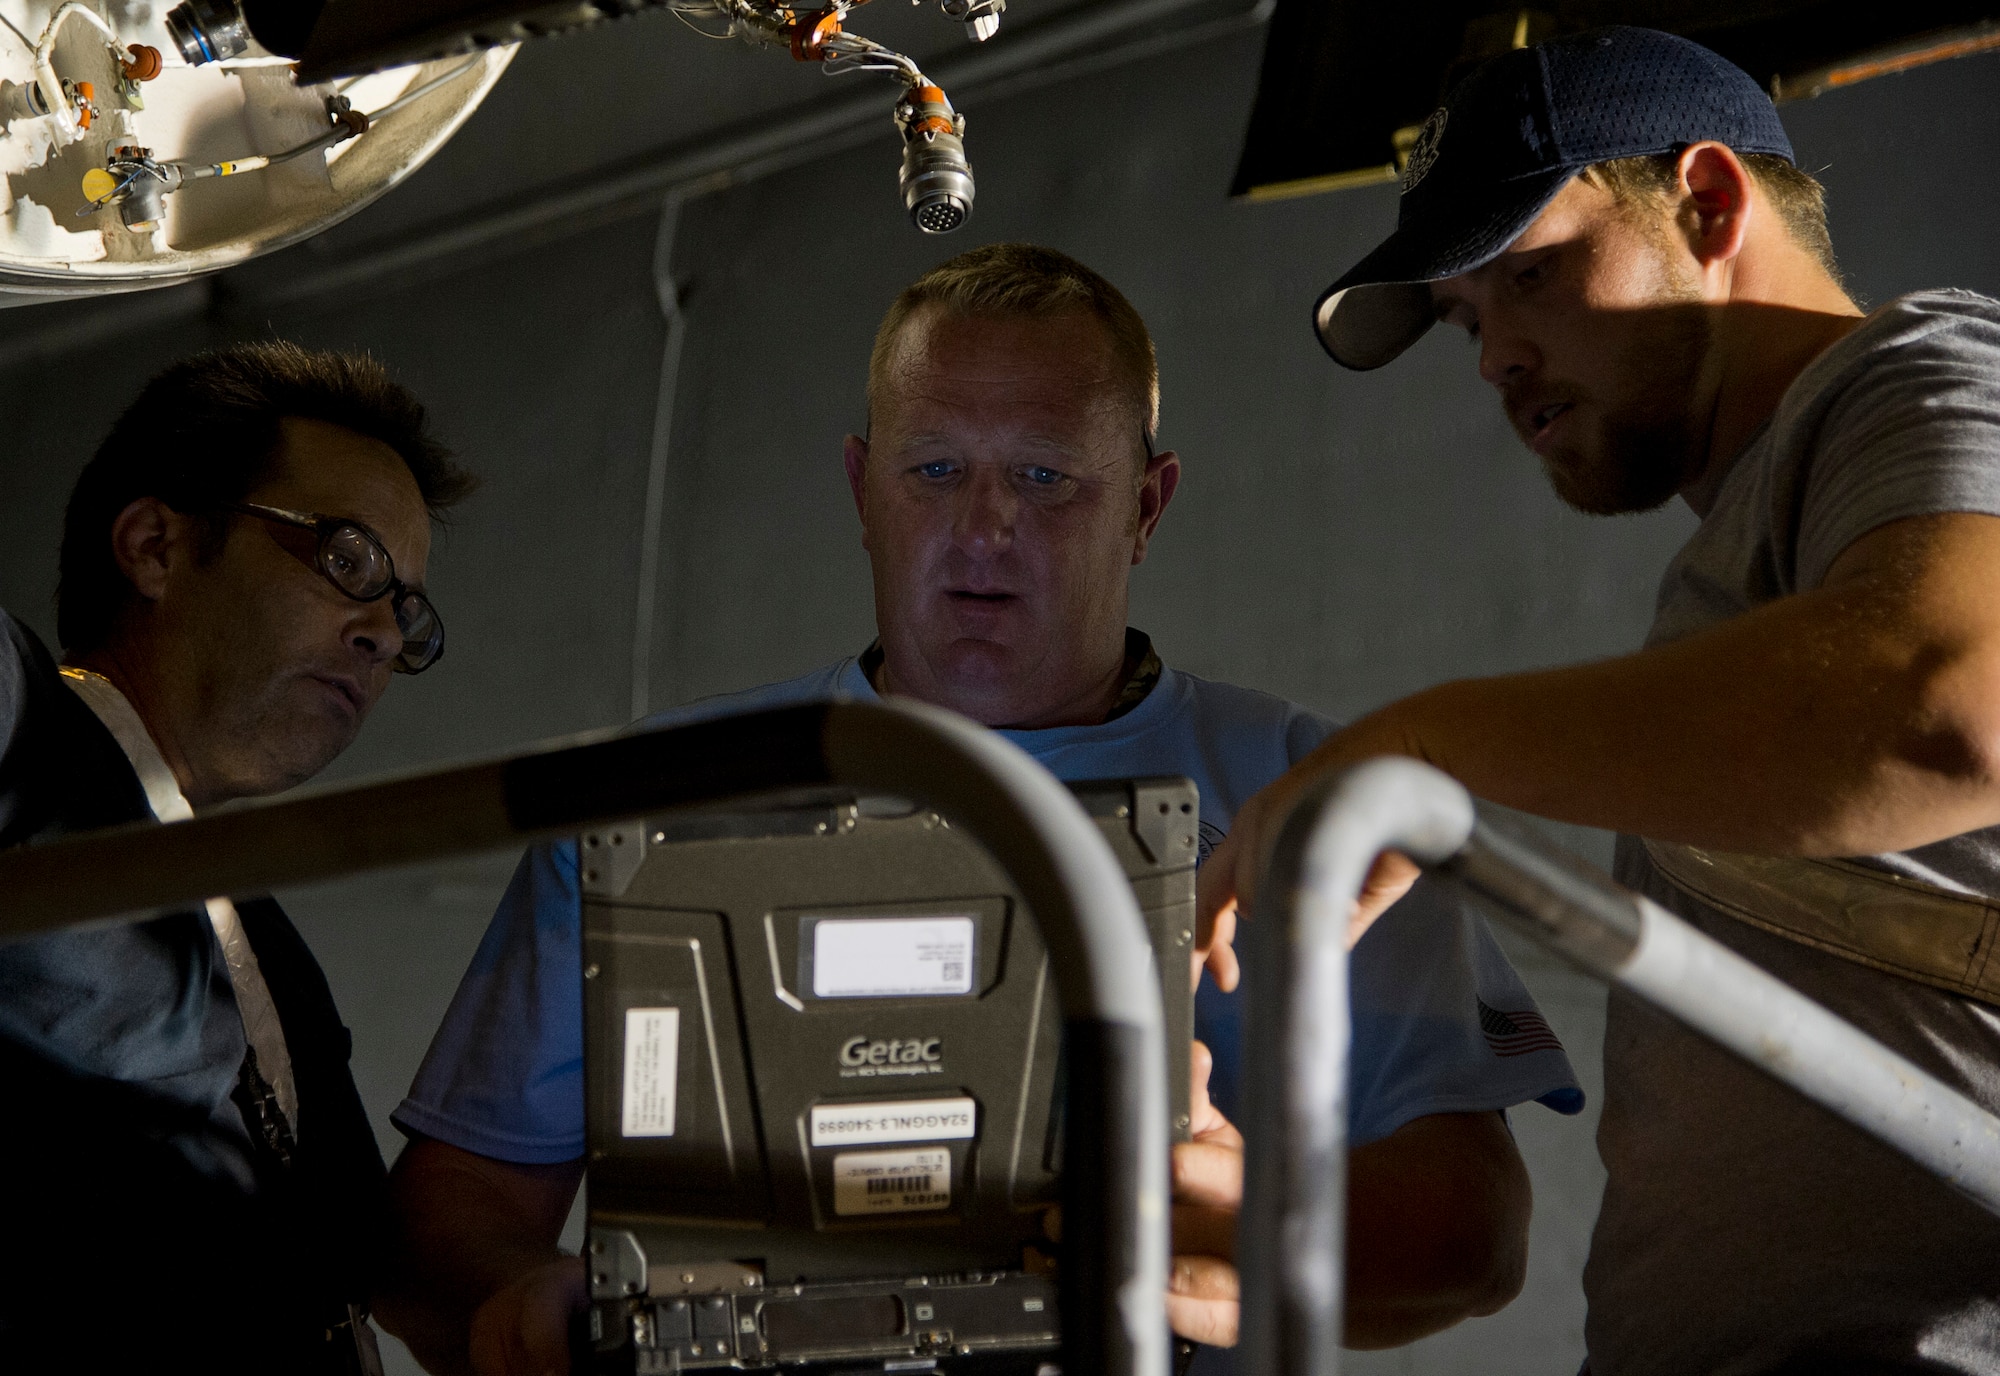 ALTUS AIR FORCE BASE, Okla. – Ken Burris, 97th Maintenance Directorate electrician, Jeffrey Cunningham, 97th MX work leader, and Alex Erickson, 97th MX hydraulic technician, review a technical order on their work laptop while working on the flightline. The members of the 97th MX were replacing an Integrated Drive Generator on a U.S. Air Force C-17 Globemaster III during the night shift. The 97th MX is one of the many squadrons around base that continues to work 24 hours a day. (U.S. Air Force photo by Senior Airman Kenneth W. Norman / Released)